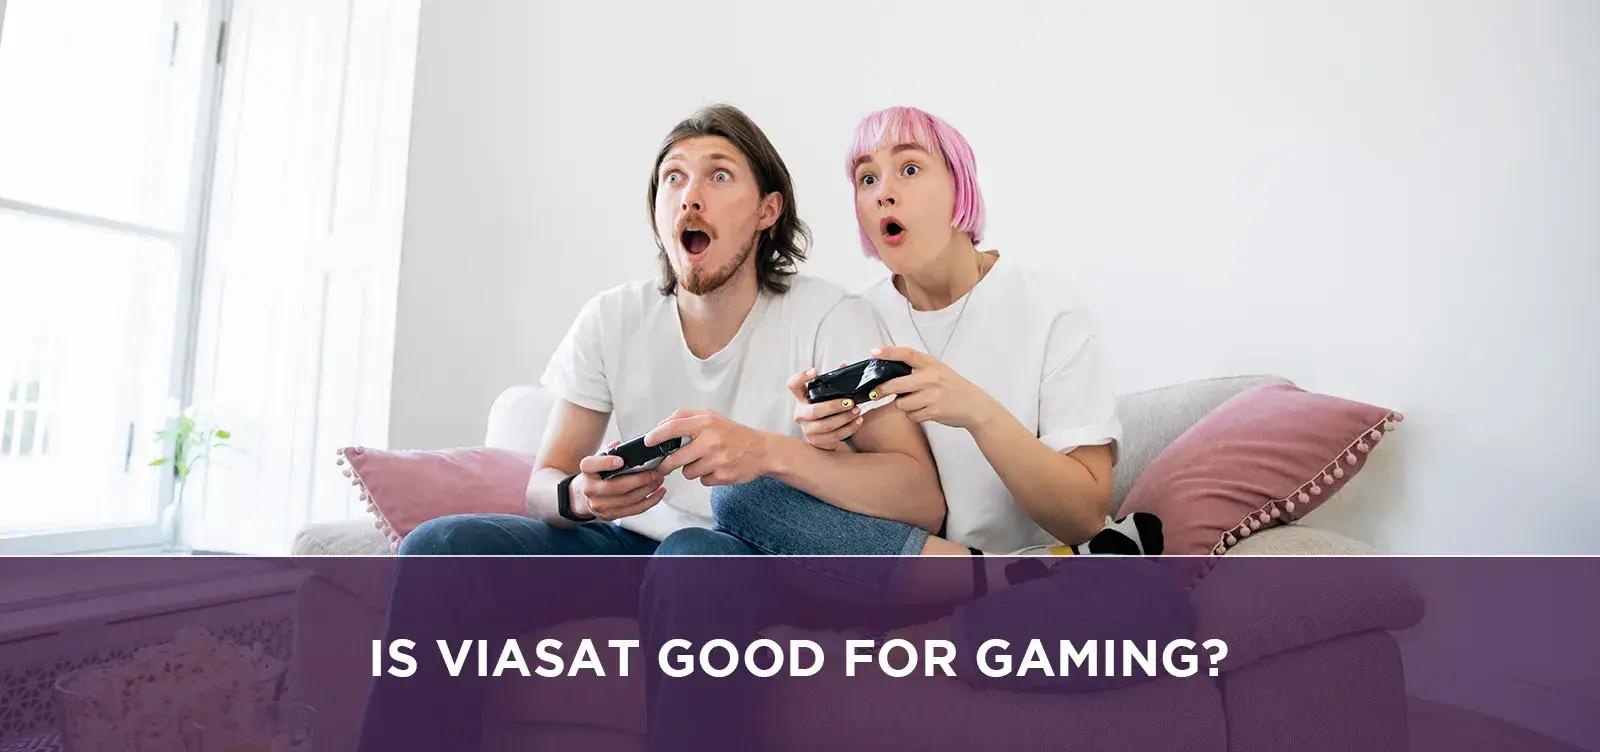 Is viasat good for gaming